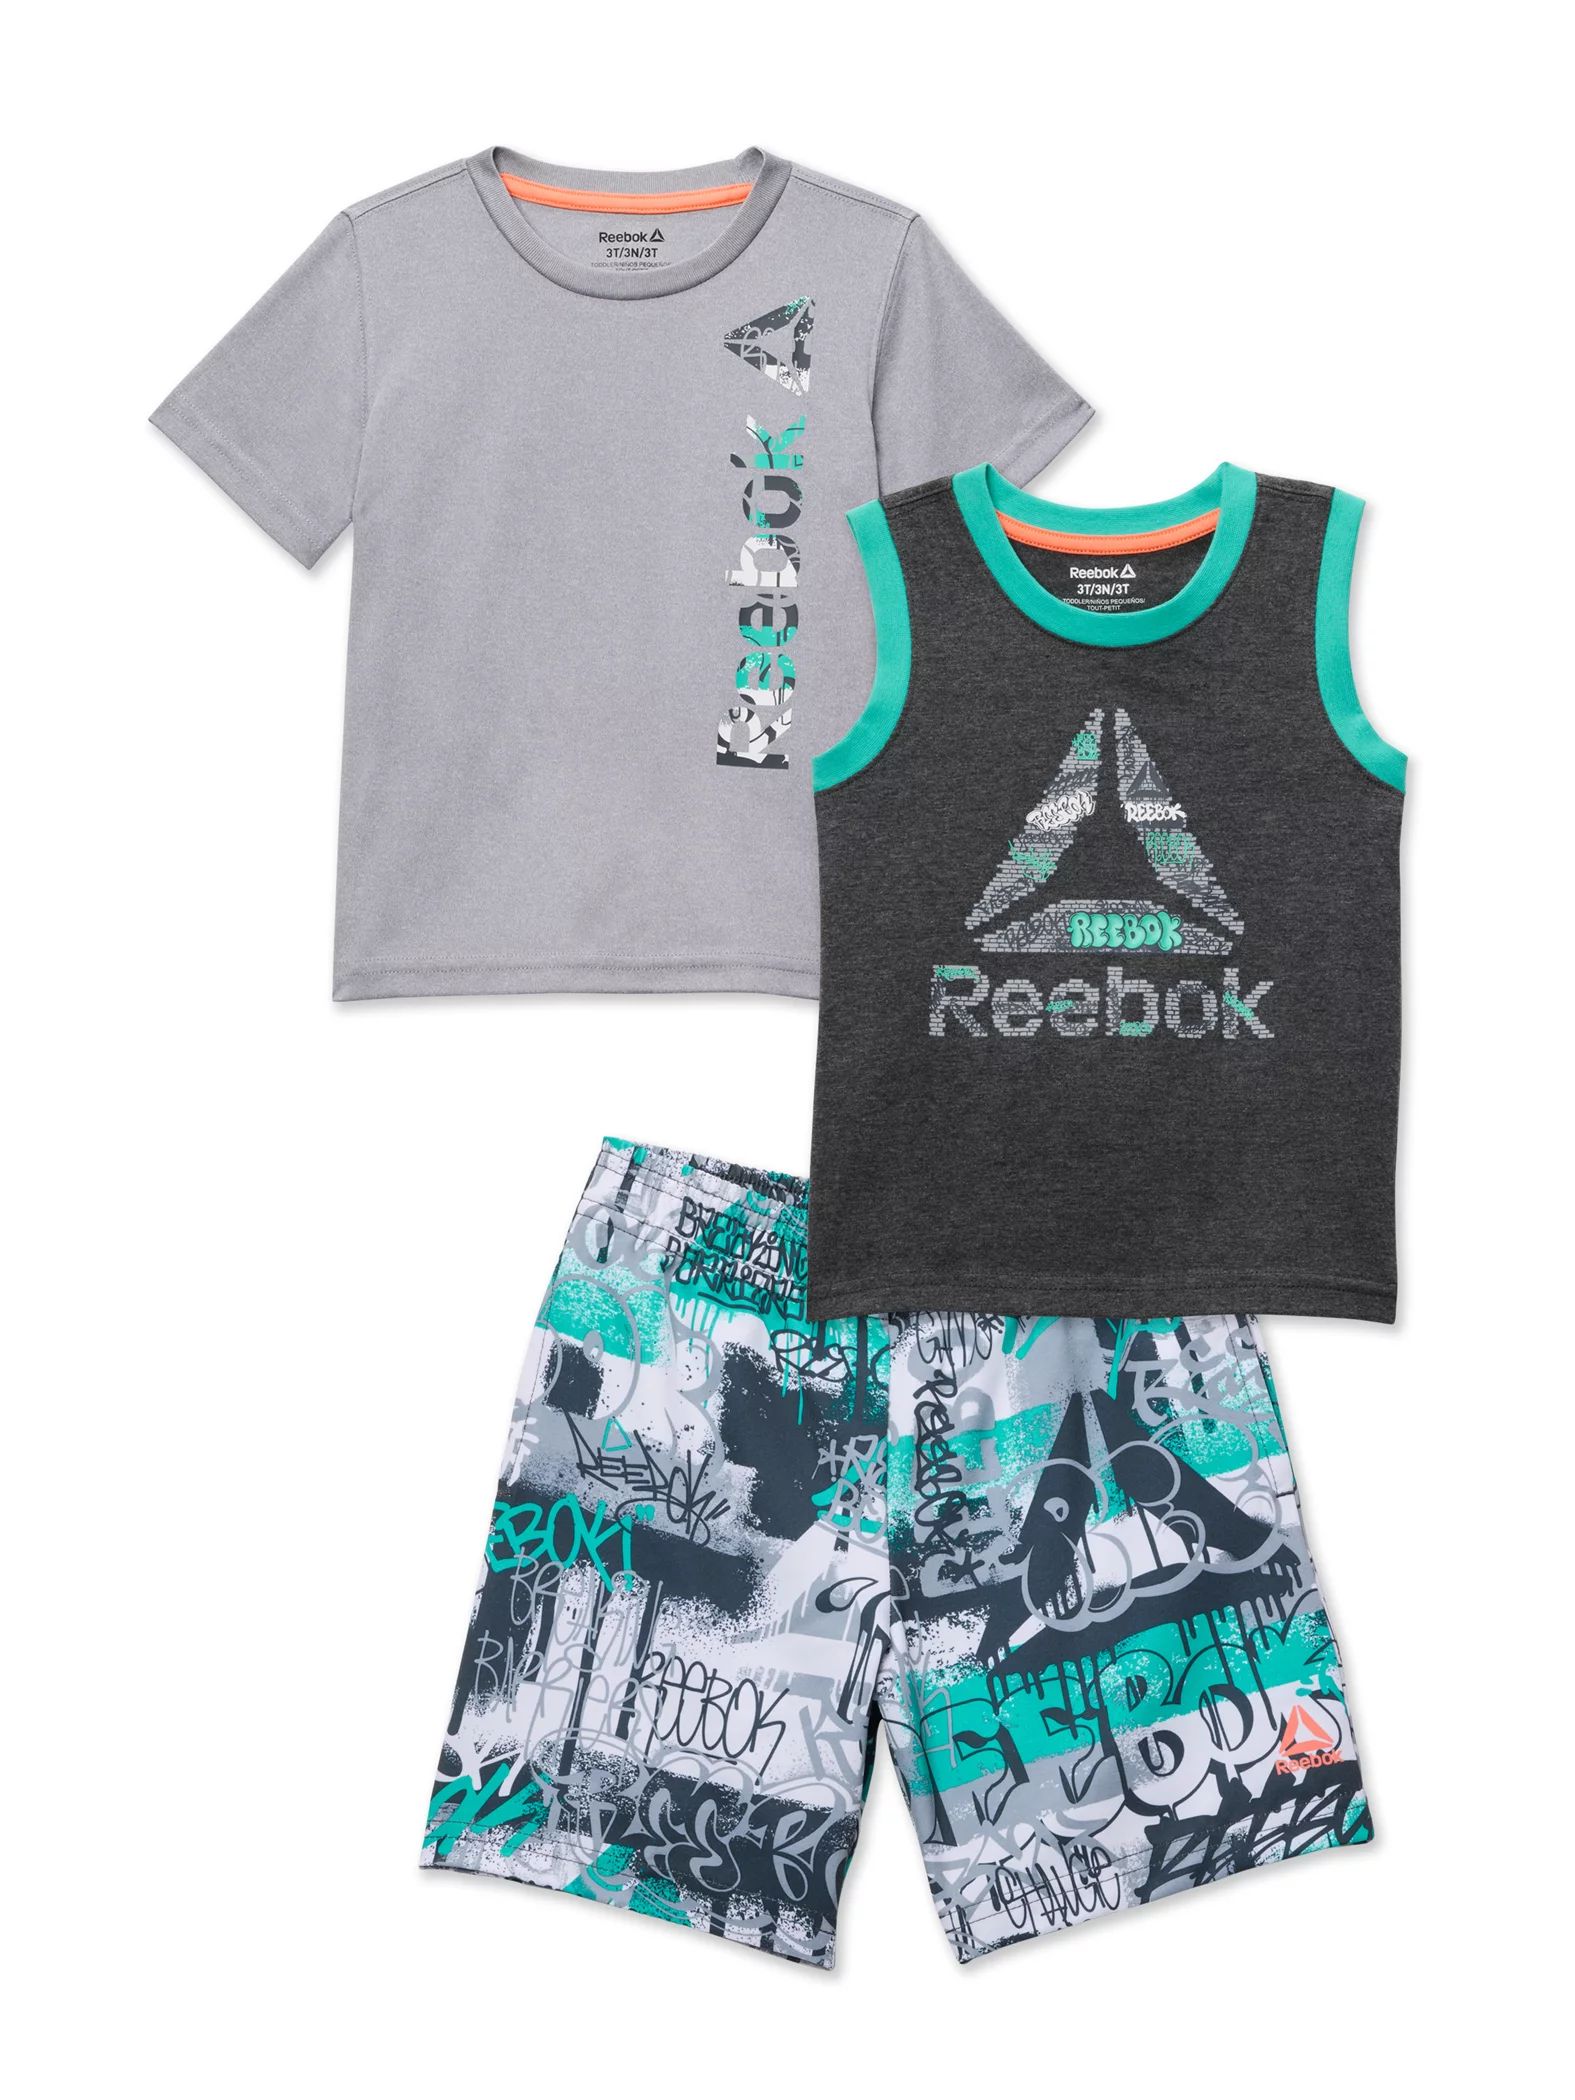 Reebok Baby and Toddler Boy T-Shirt, Tank Top, and Shorts Outfit Set, 3-Piece, Sizes 12M-5T | Walmart (US)